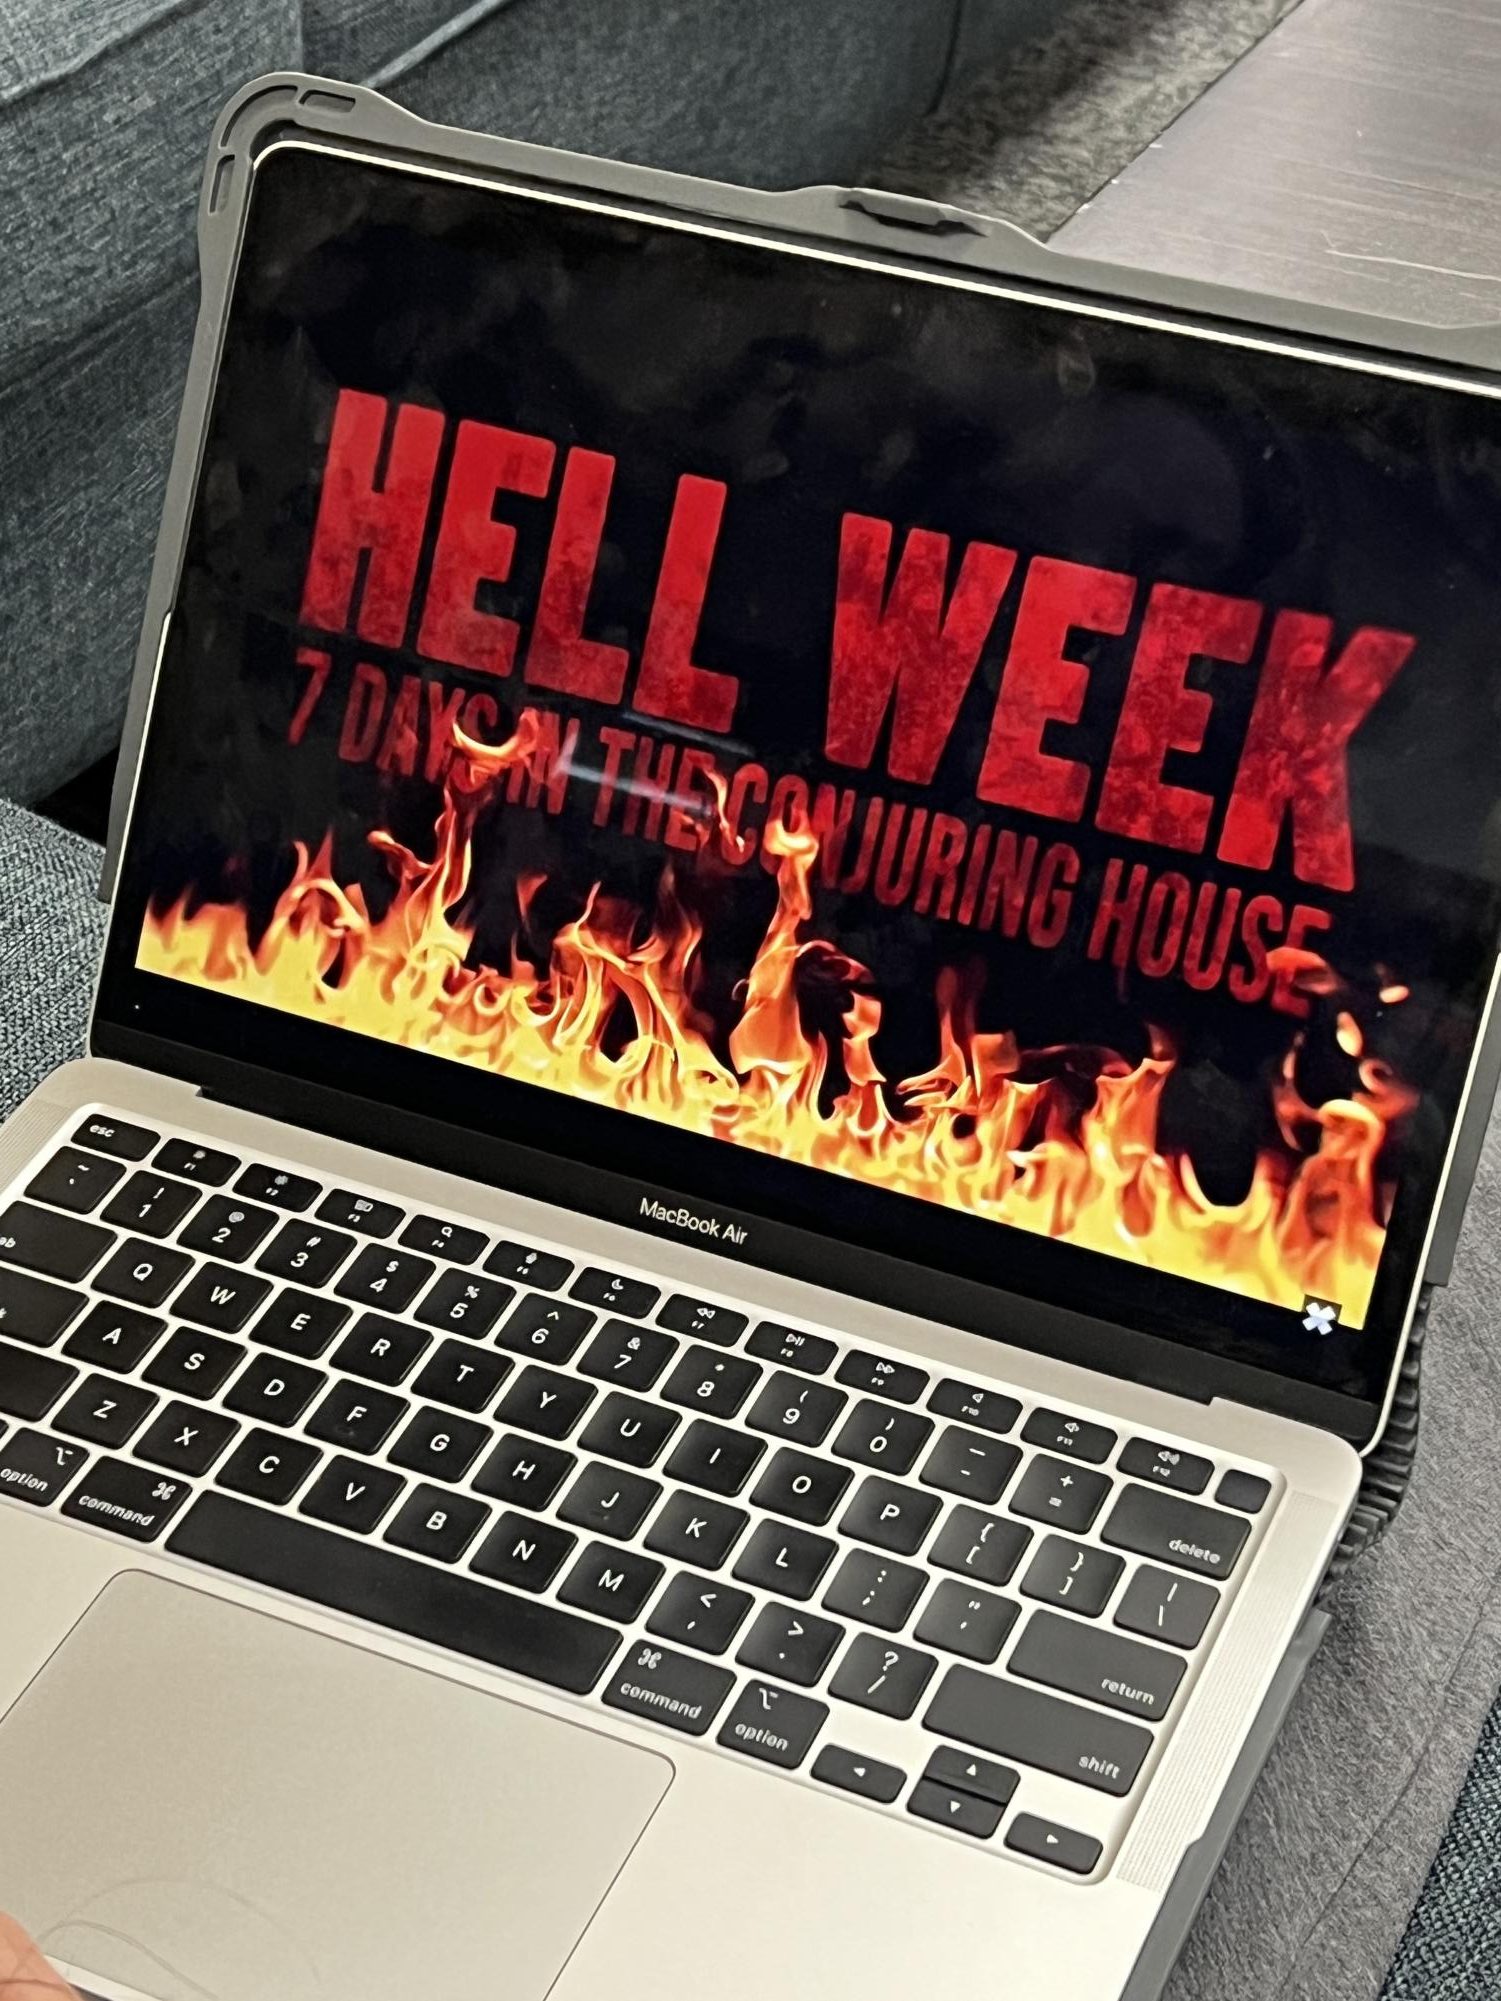 Entertainment Review: Sam and Colby Hell Week